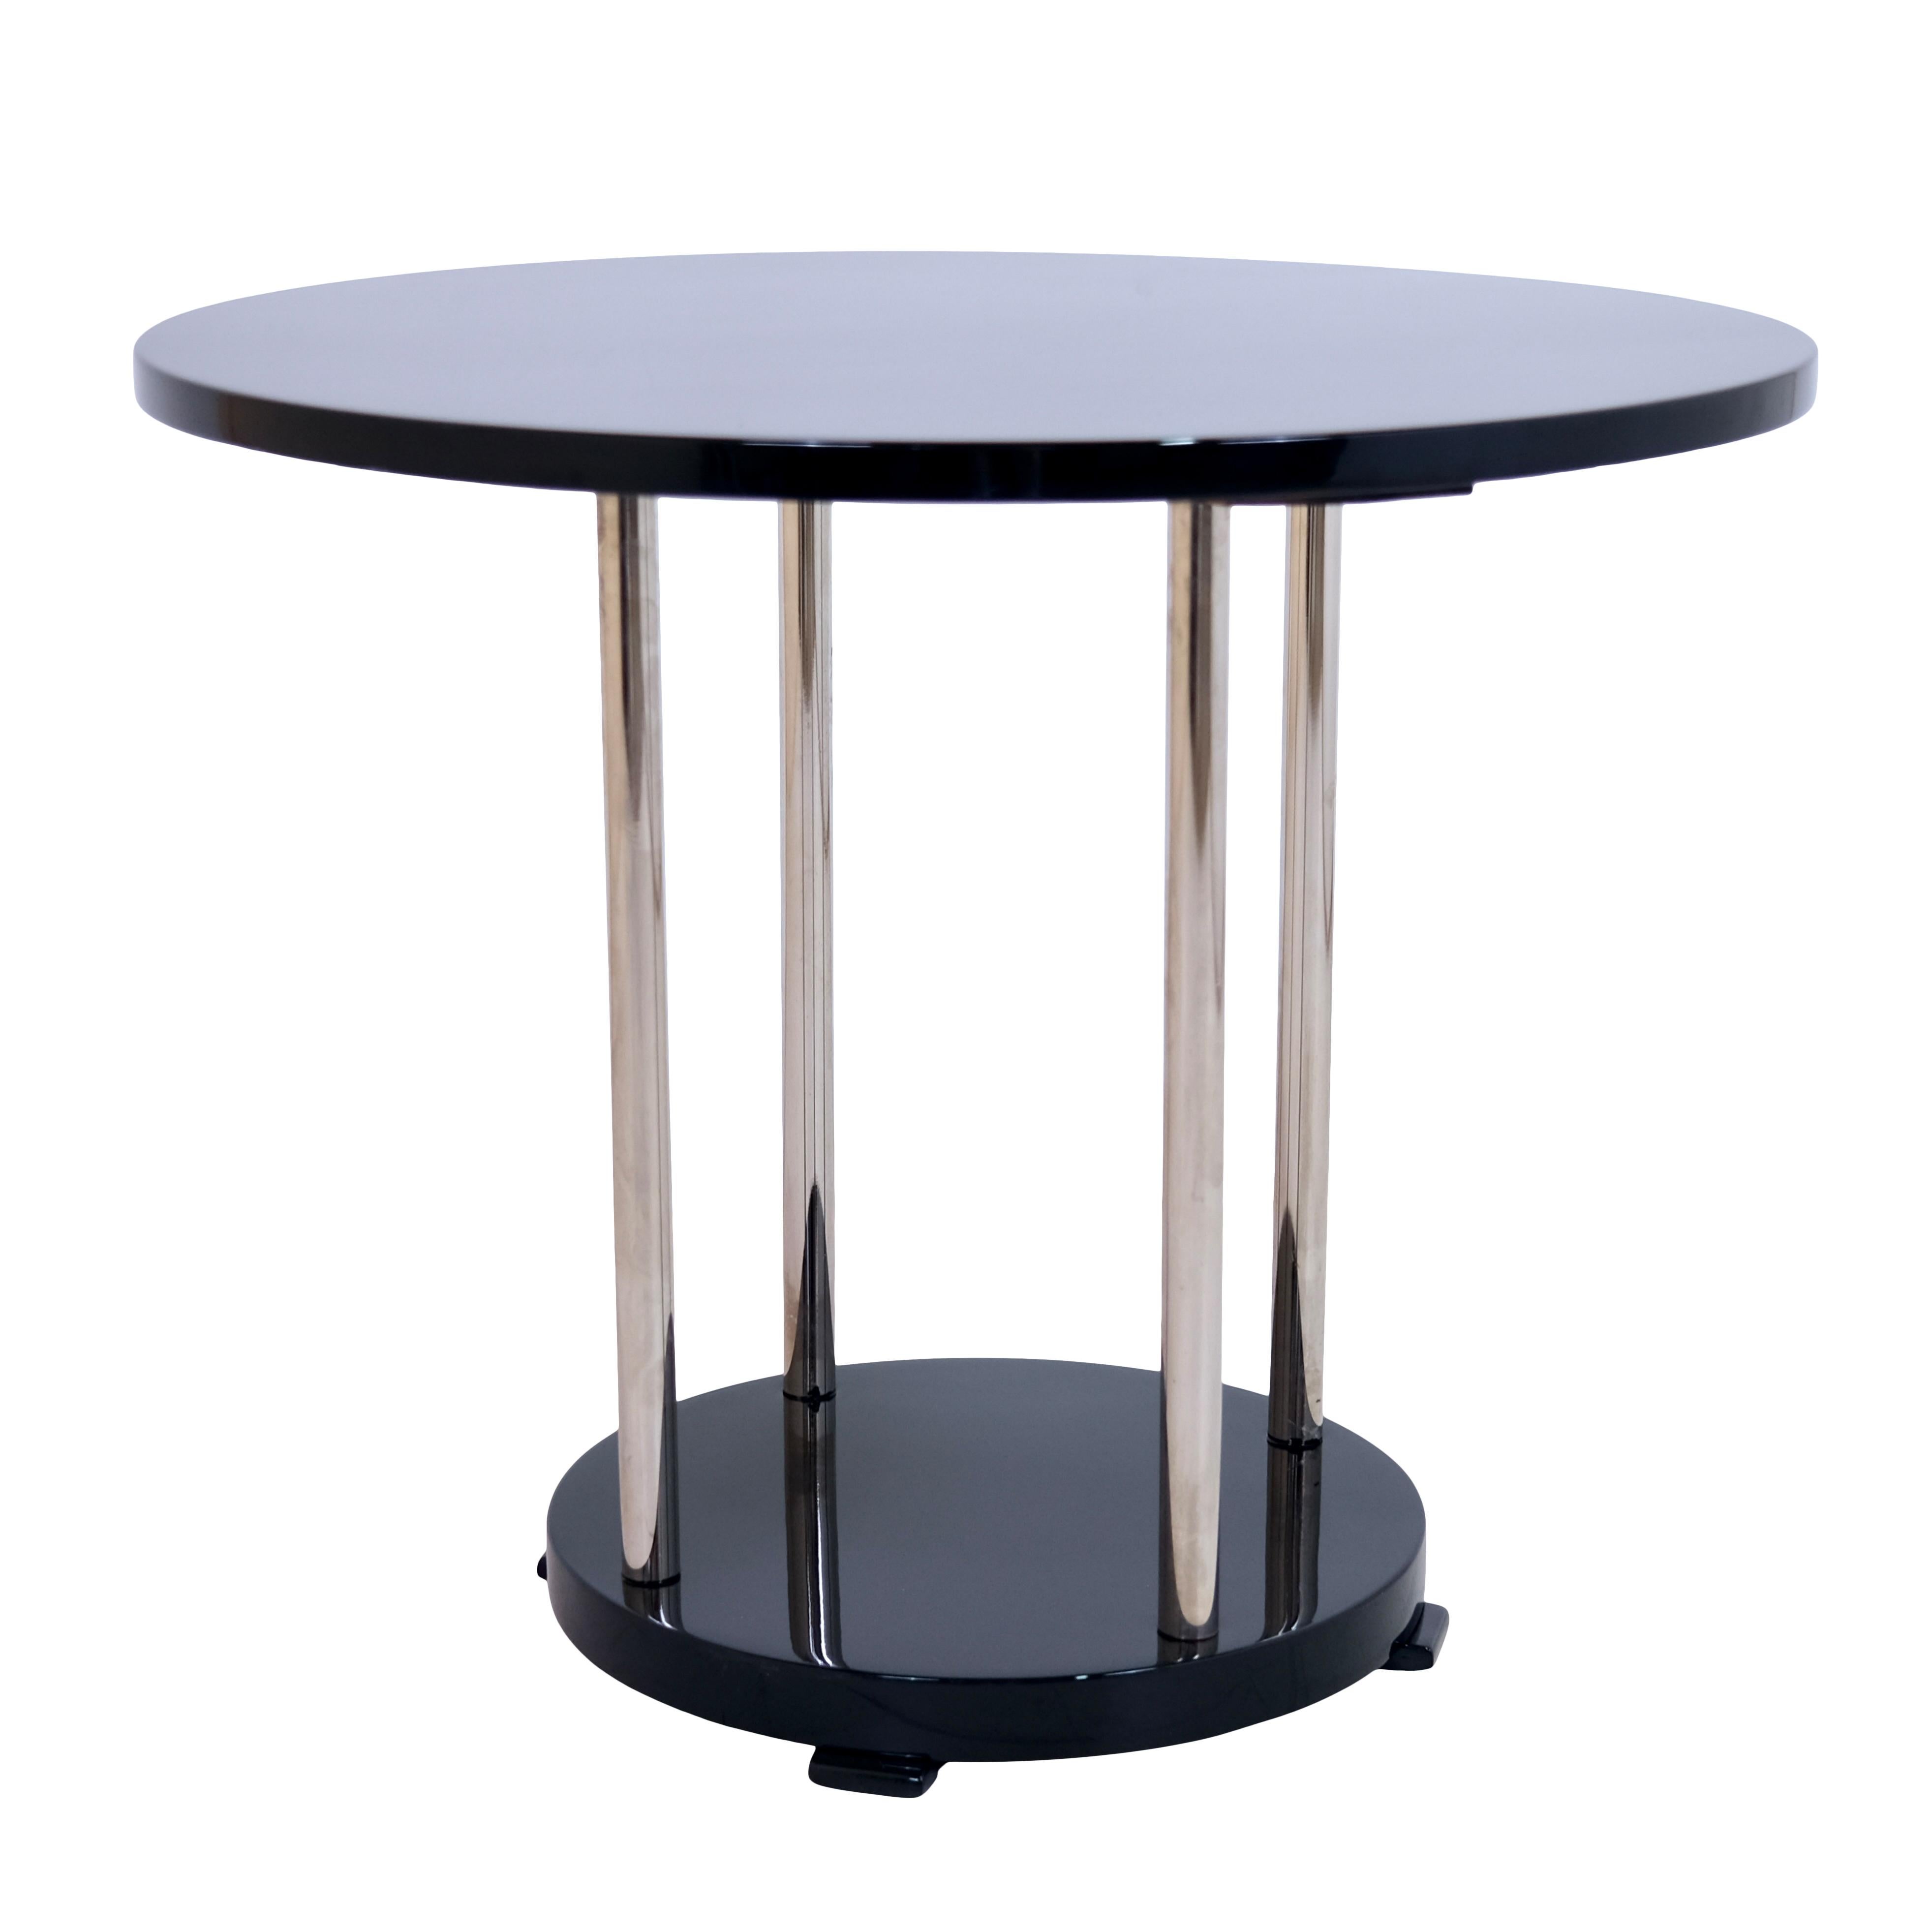 Round tubular steel side table in black lacquer

Side table
Original chrome plating
Round base and table top in piano lacquer, black high gloss

France, 1940s

Dimensions:
Diameter: 69 cm
Height: 57 cm. 